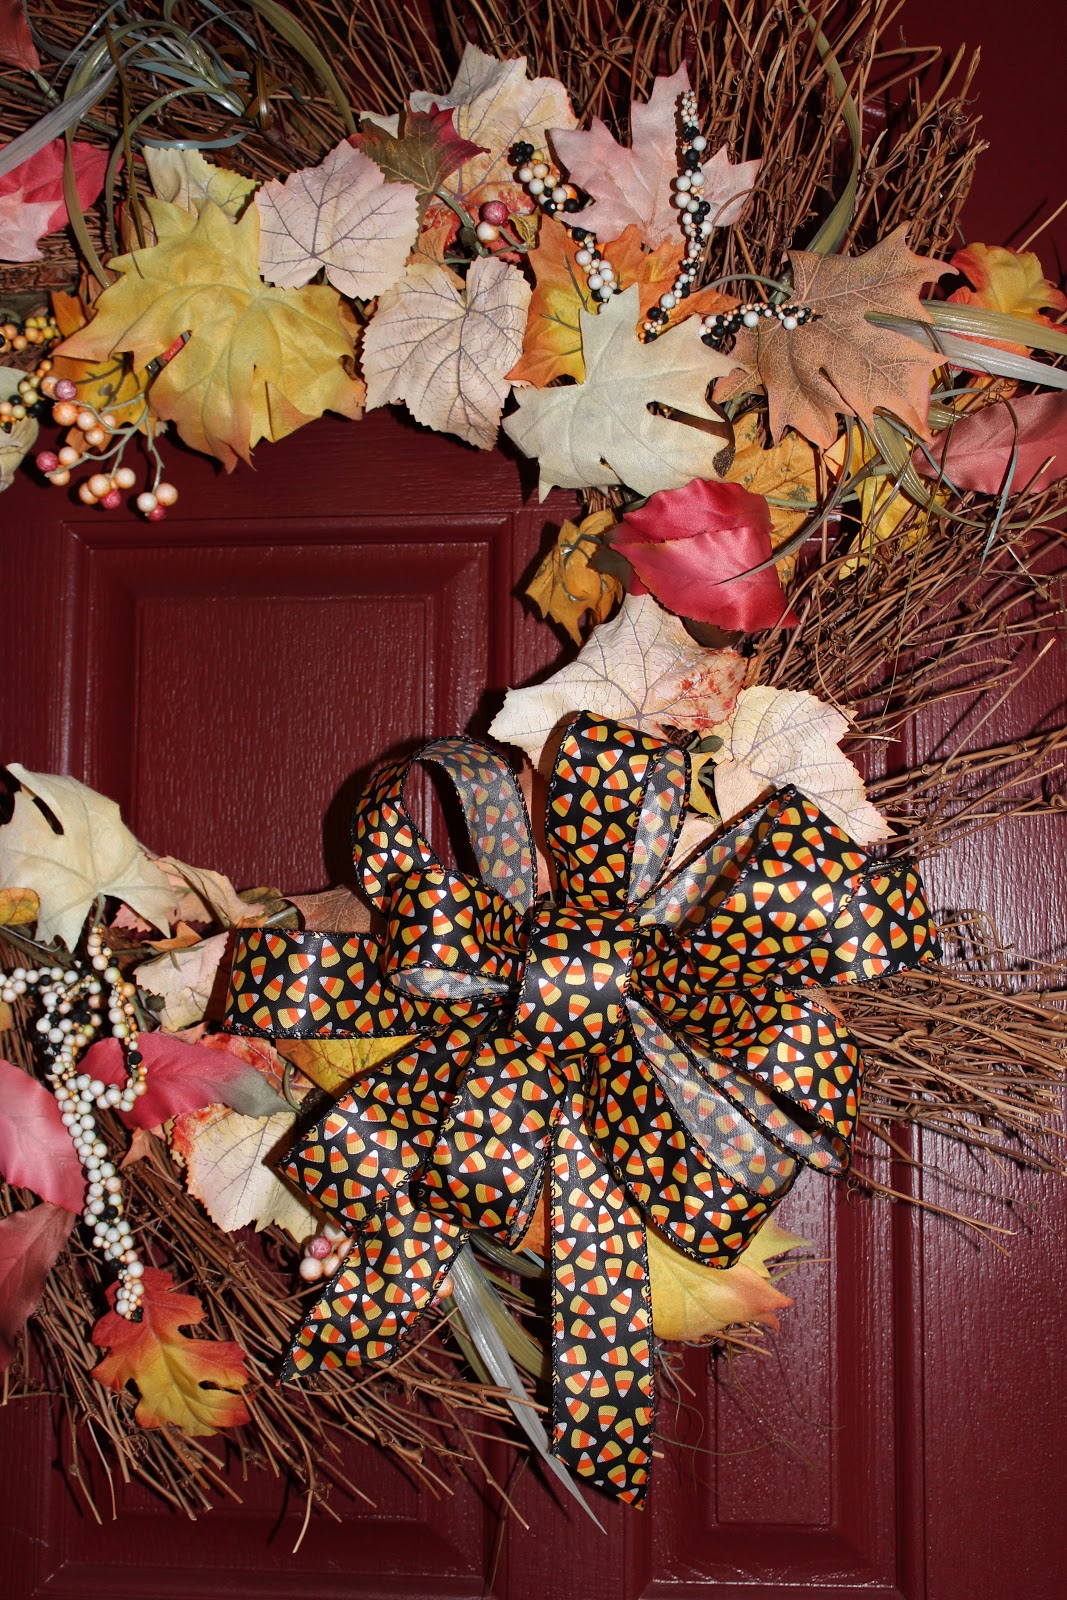 The Bowdabra: Create Beautiful Decorative Bows & Wreaths in Minutes